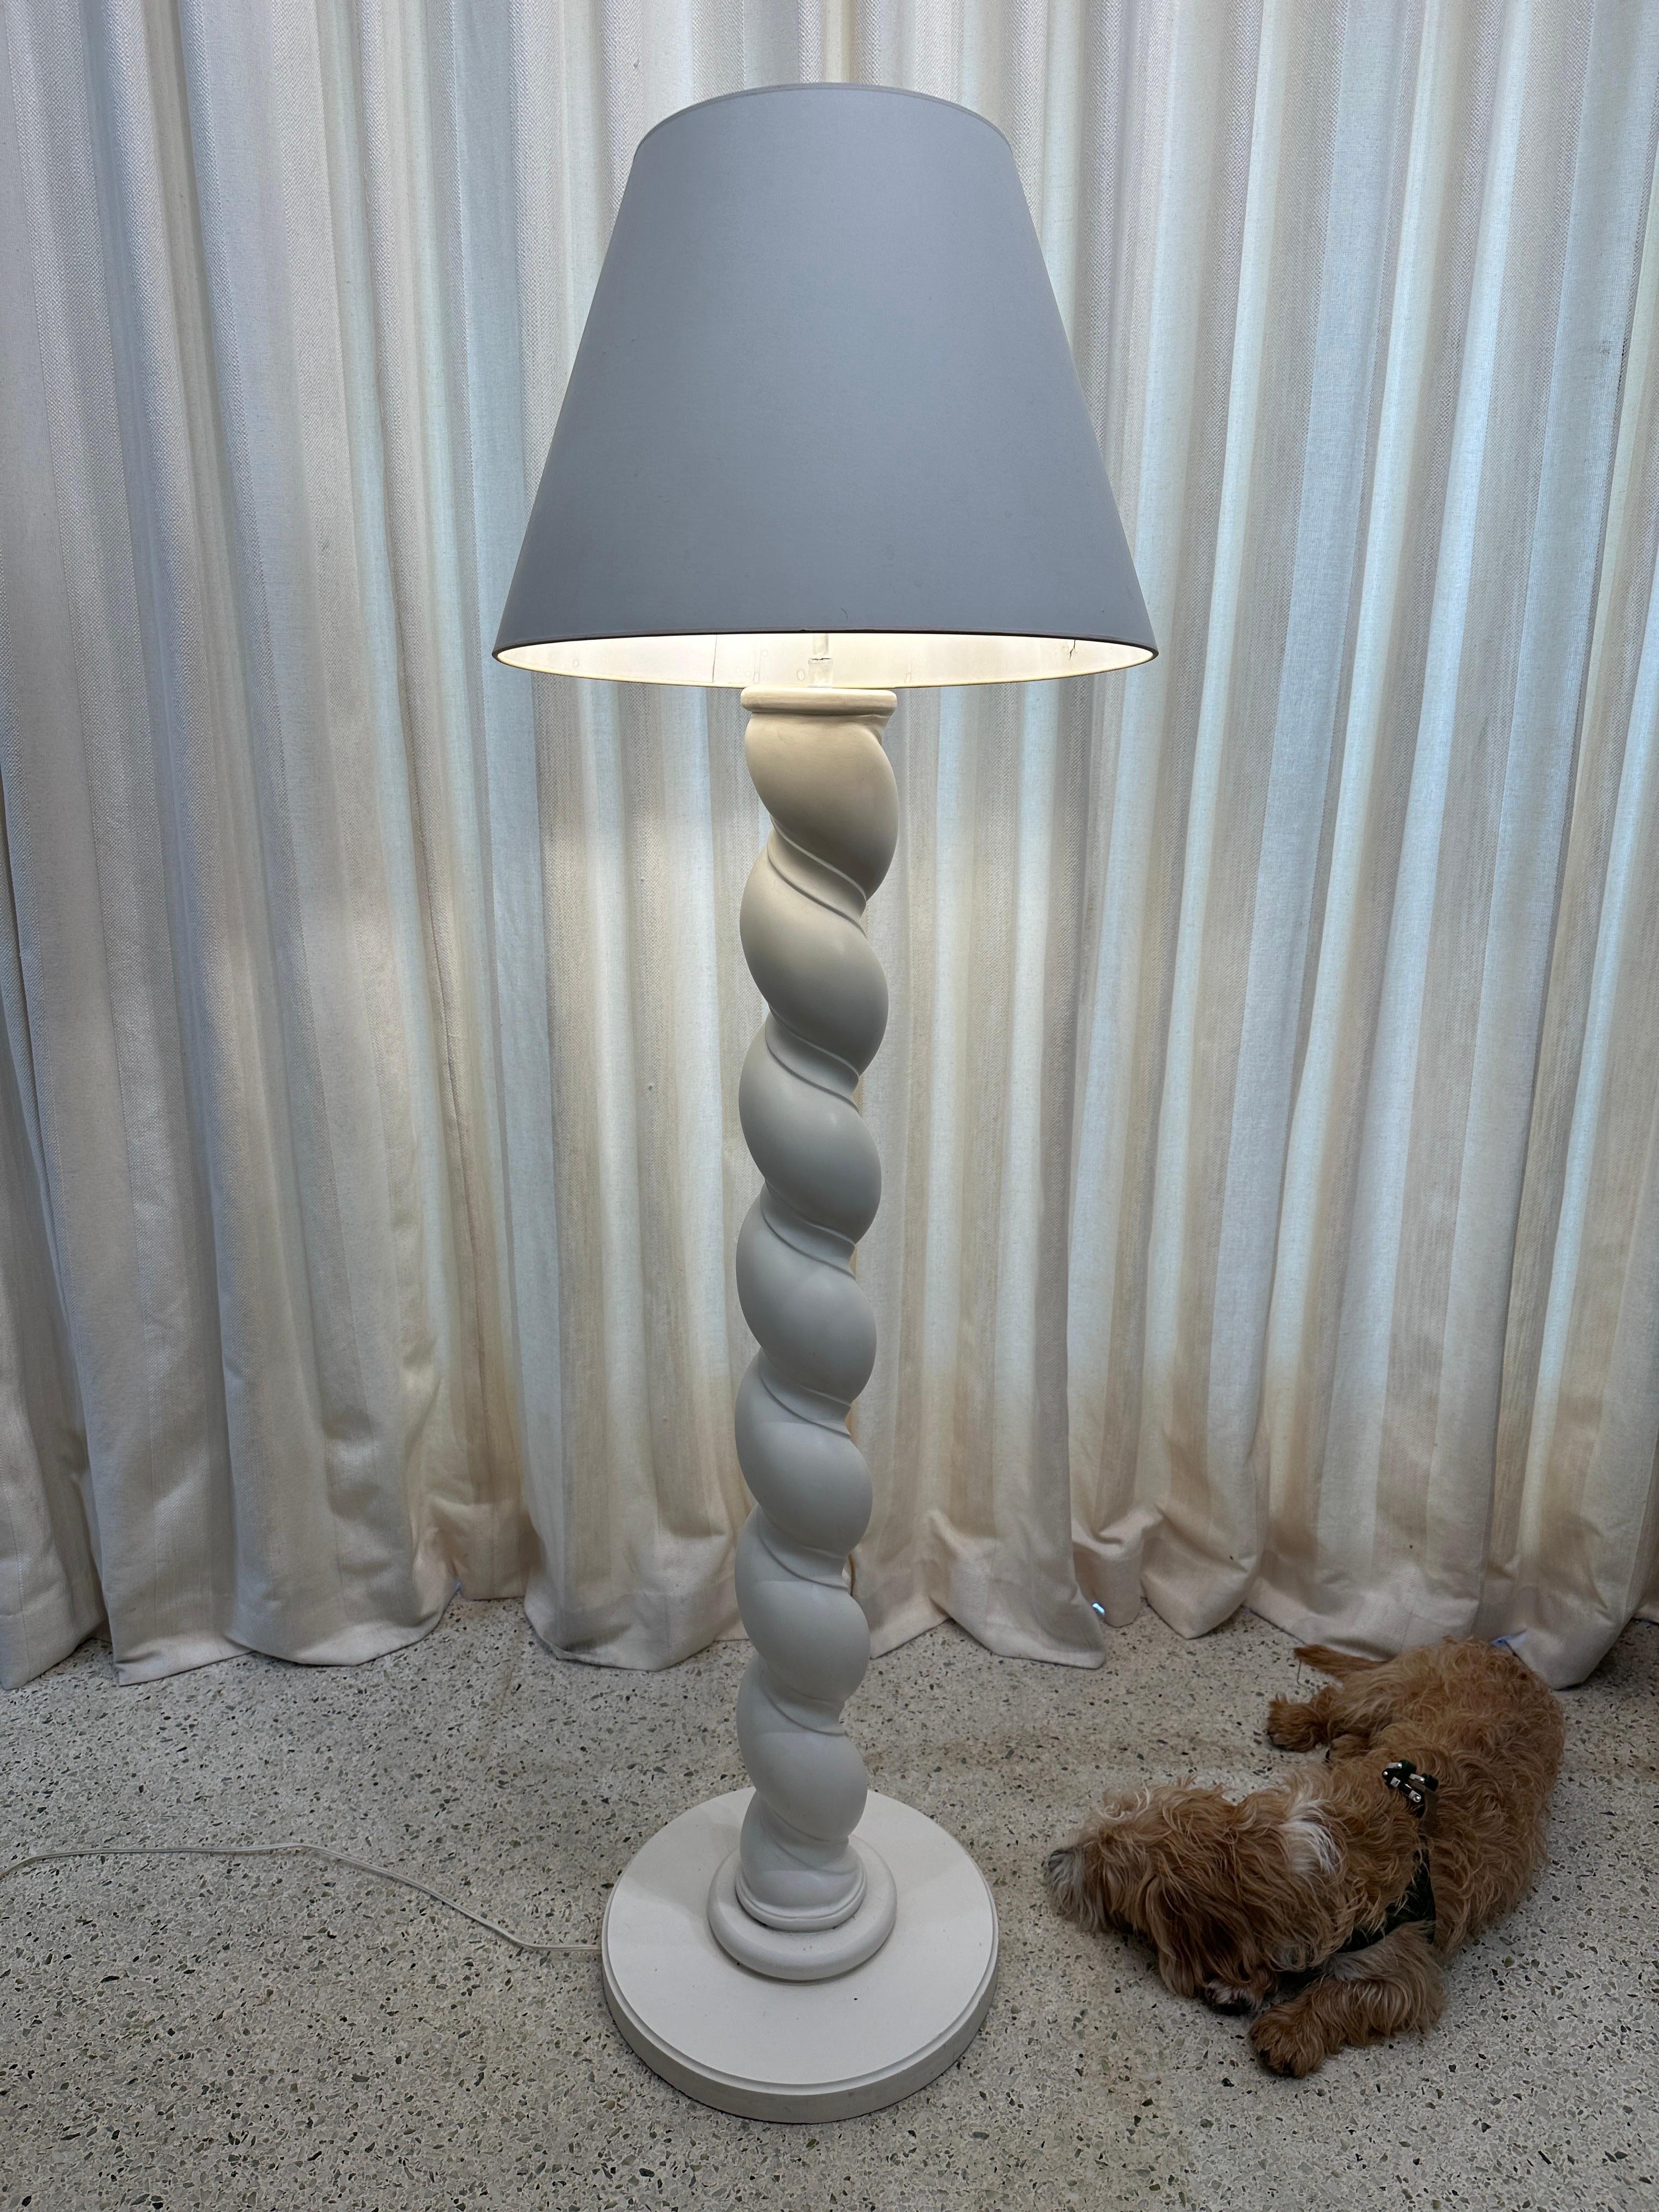 Extremely Rare Composition Plaster Floor Lamp w/ Spiraling Design by Sirmos For Sale 3